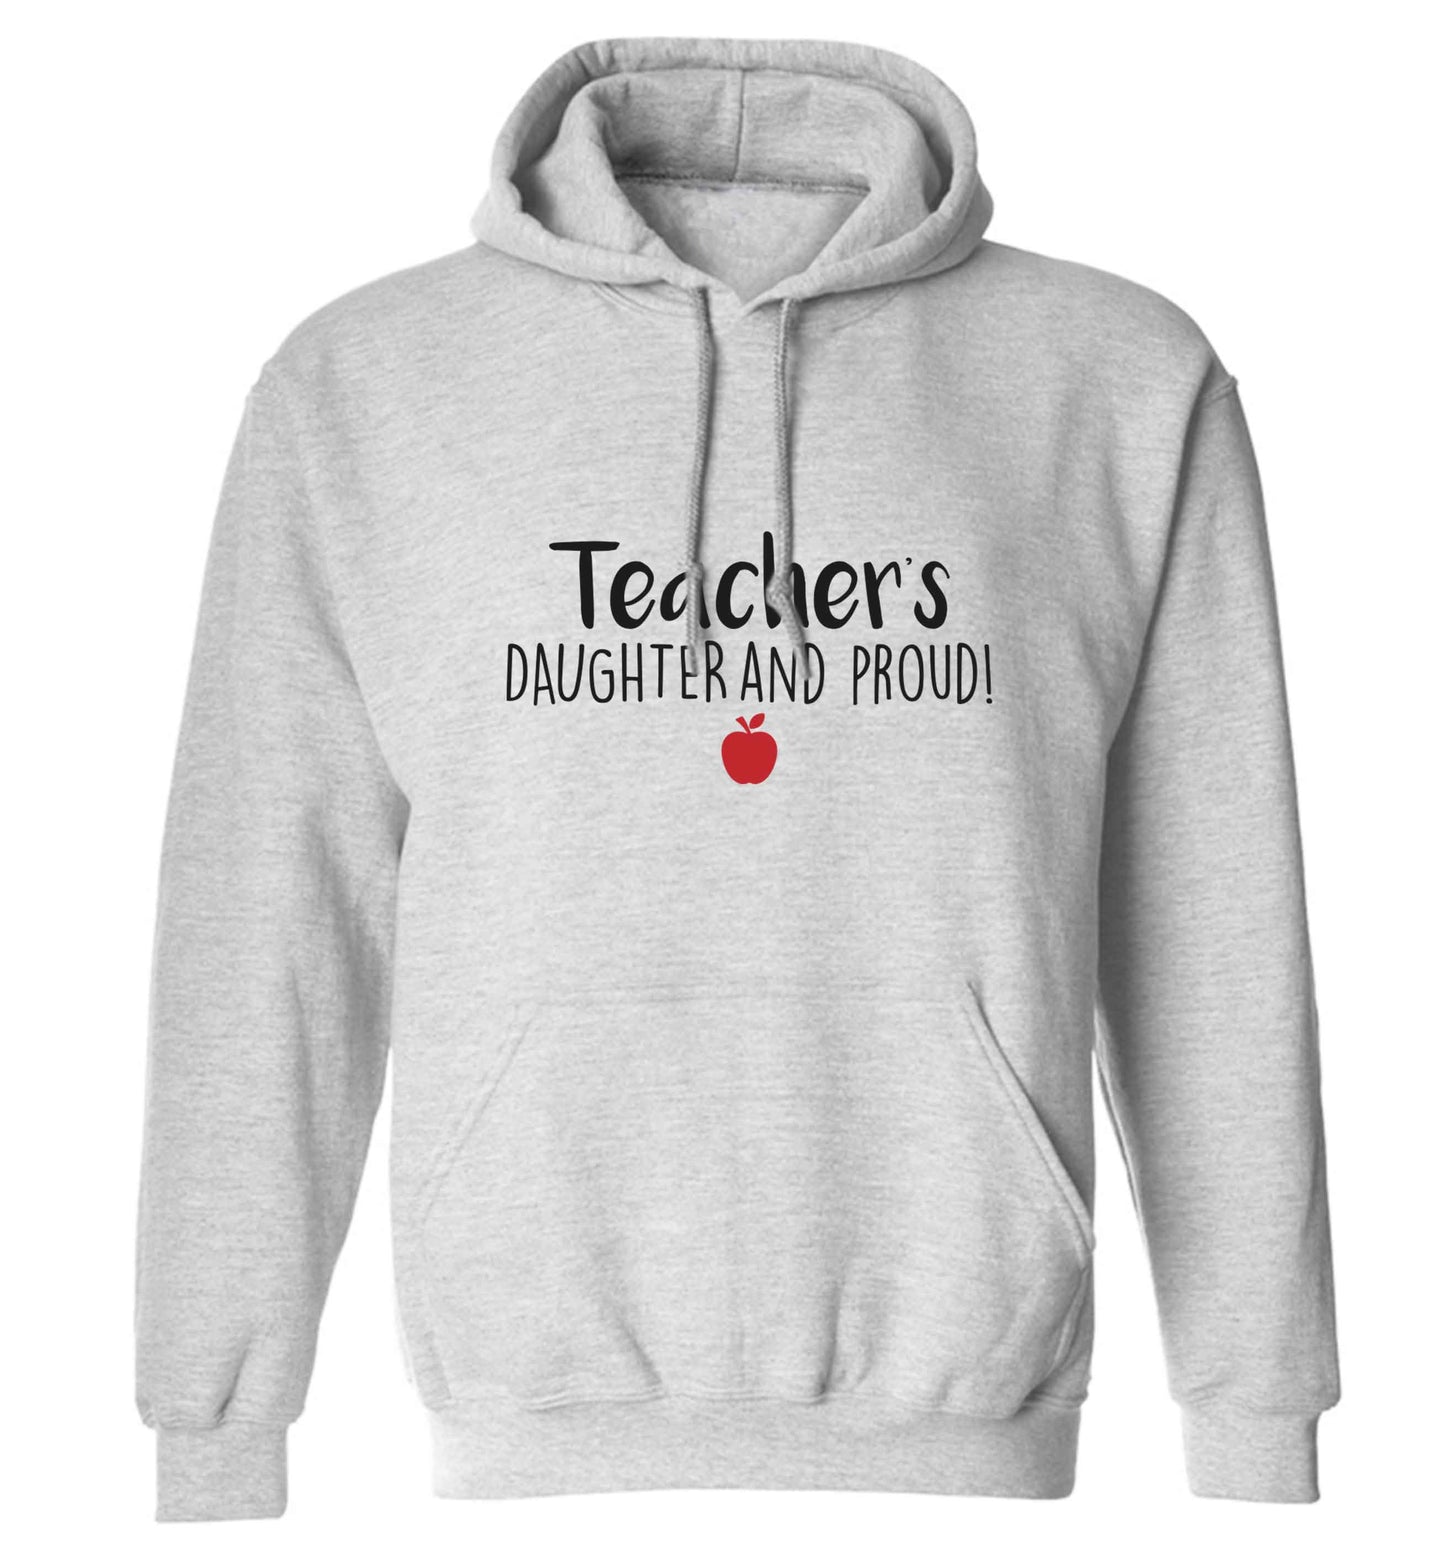 Teachers daughter and proud adults unisex grey hoodie 2XL